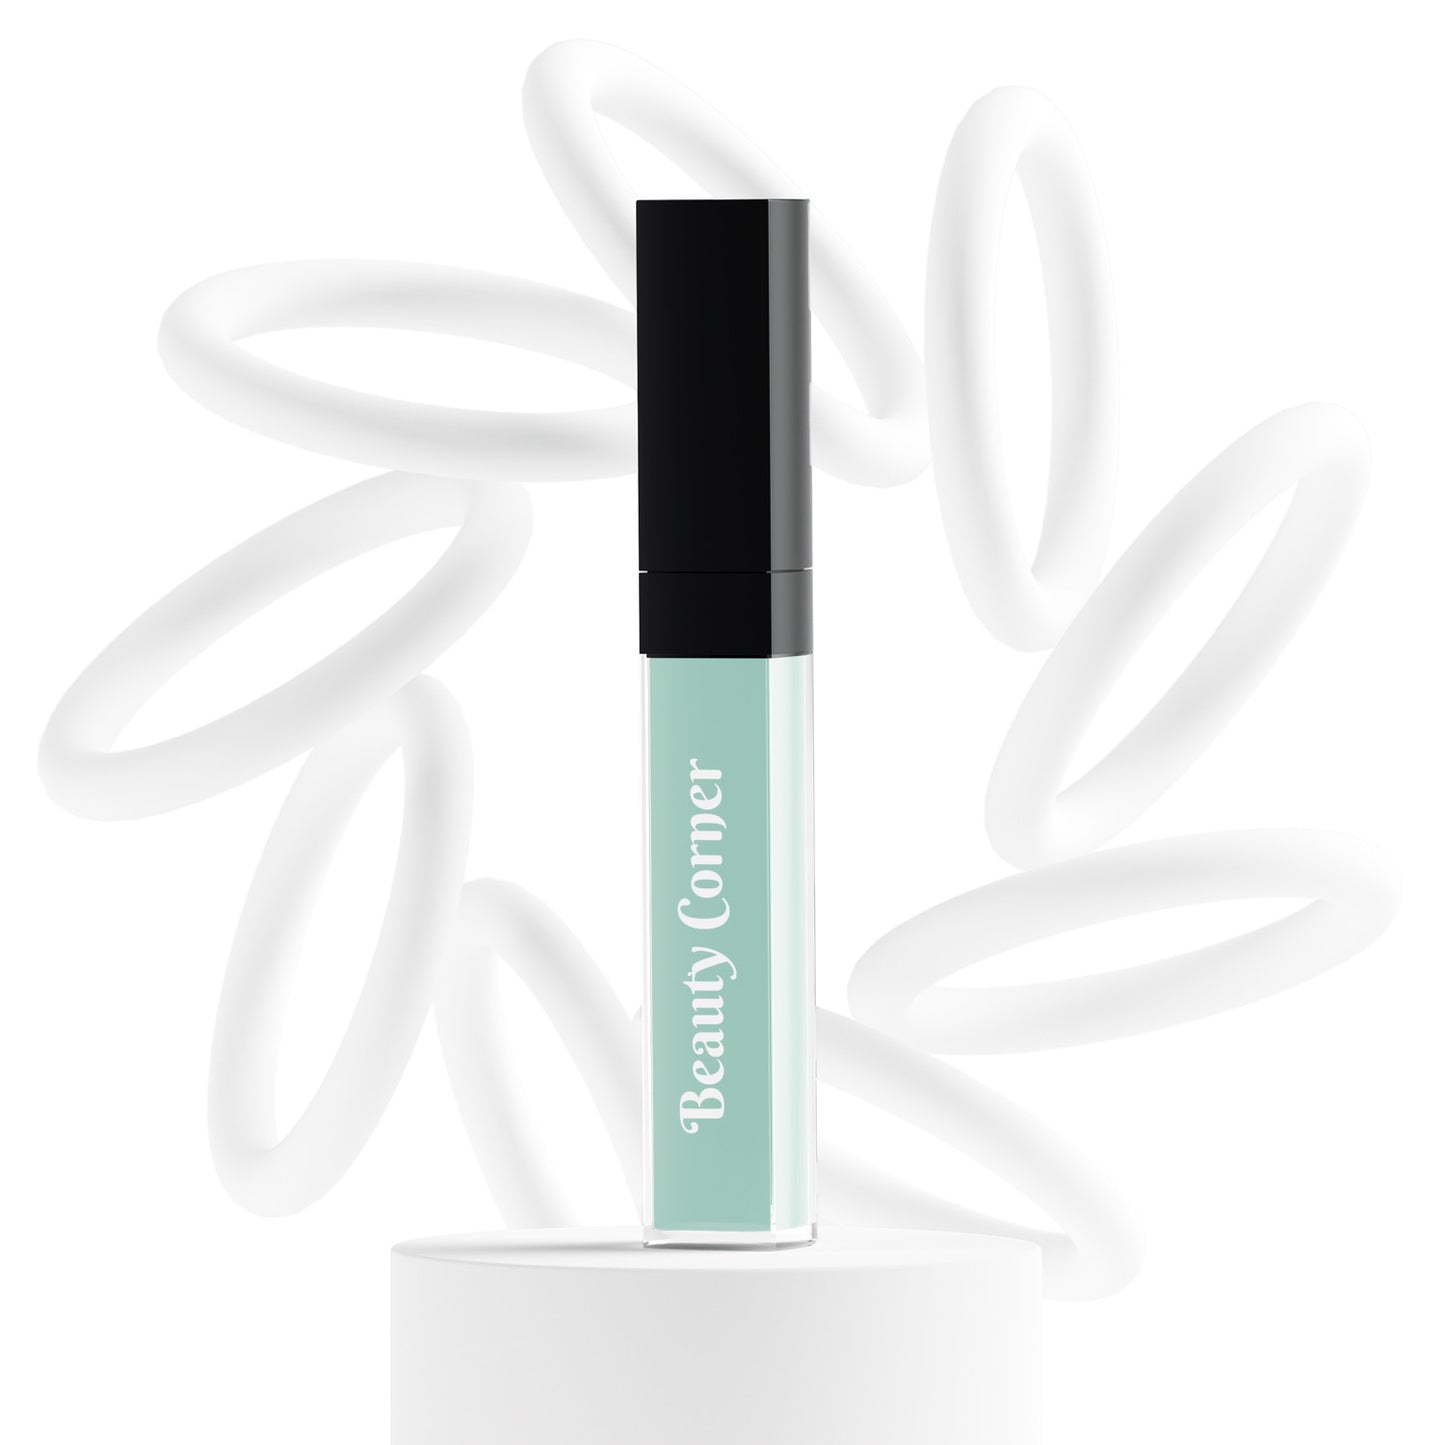 Skin Perfector Color Corrector Mint- Reduce Redness and Imperfections